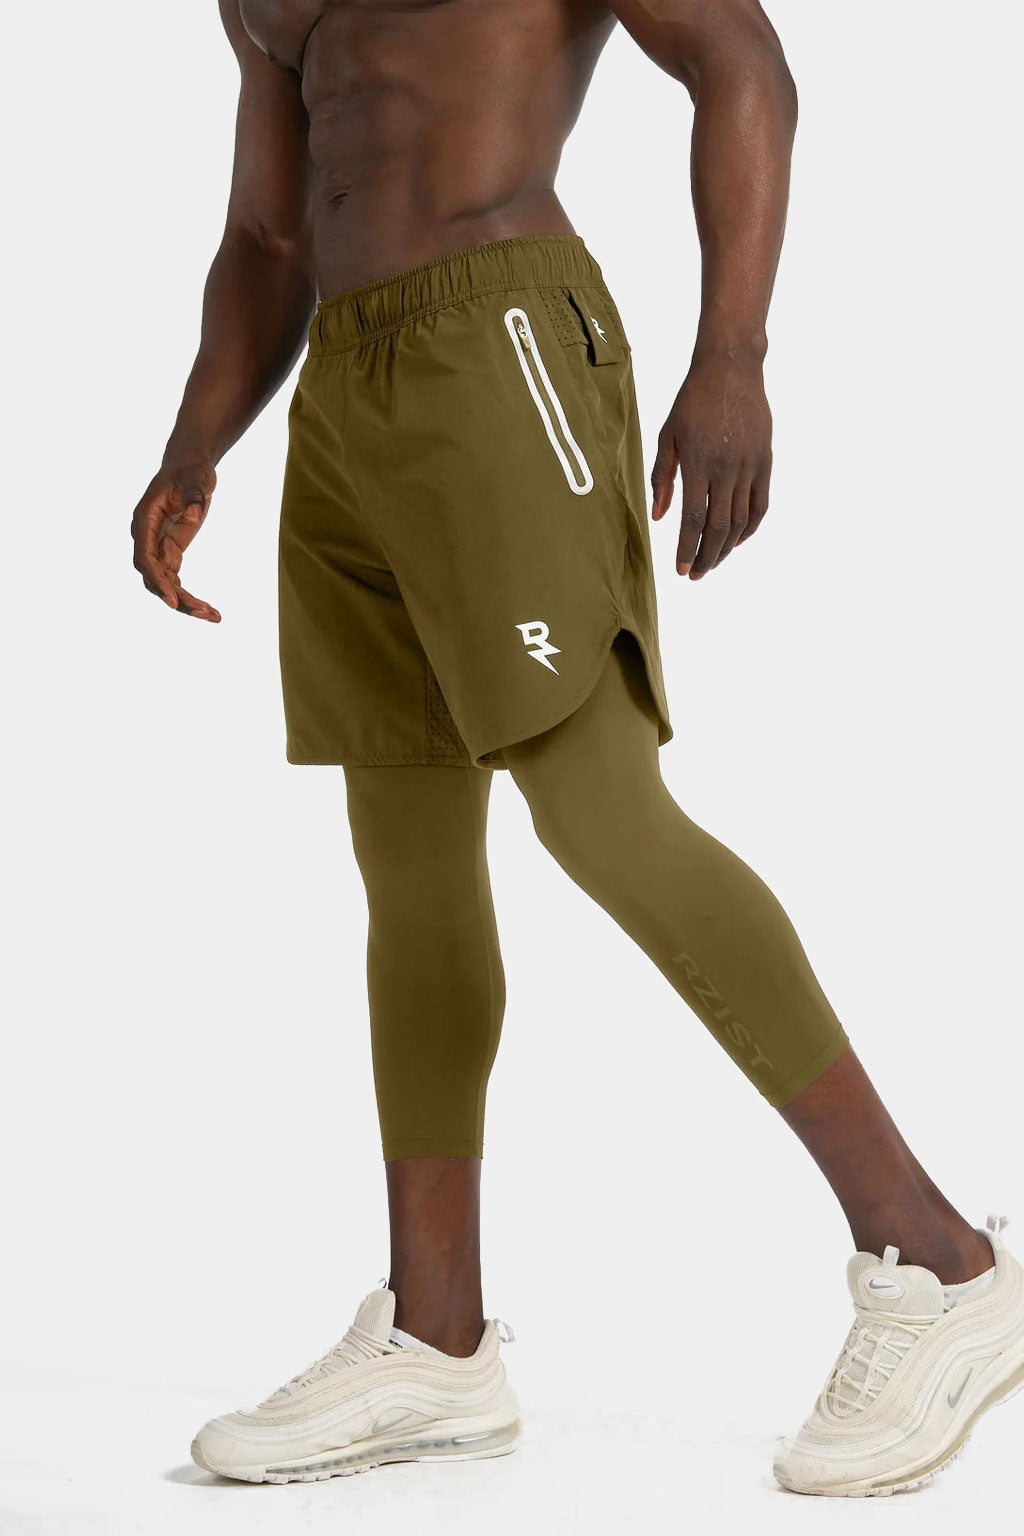 Rzist - Men's 2-in-1 Capulet Olive Shorts With Long Tights